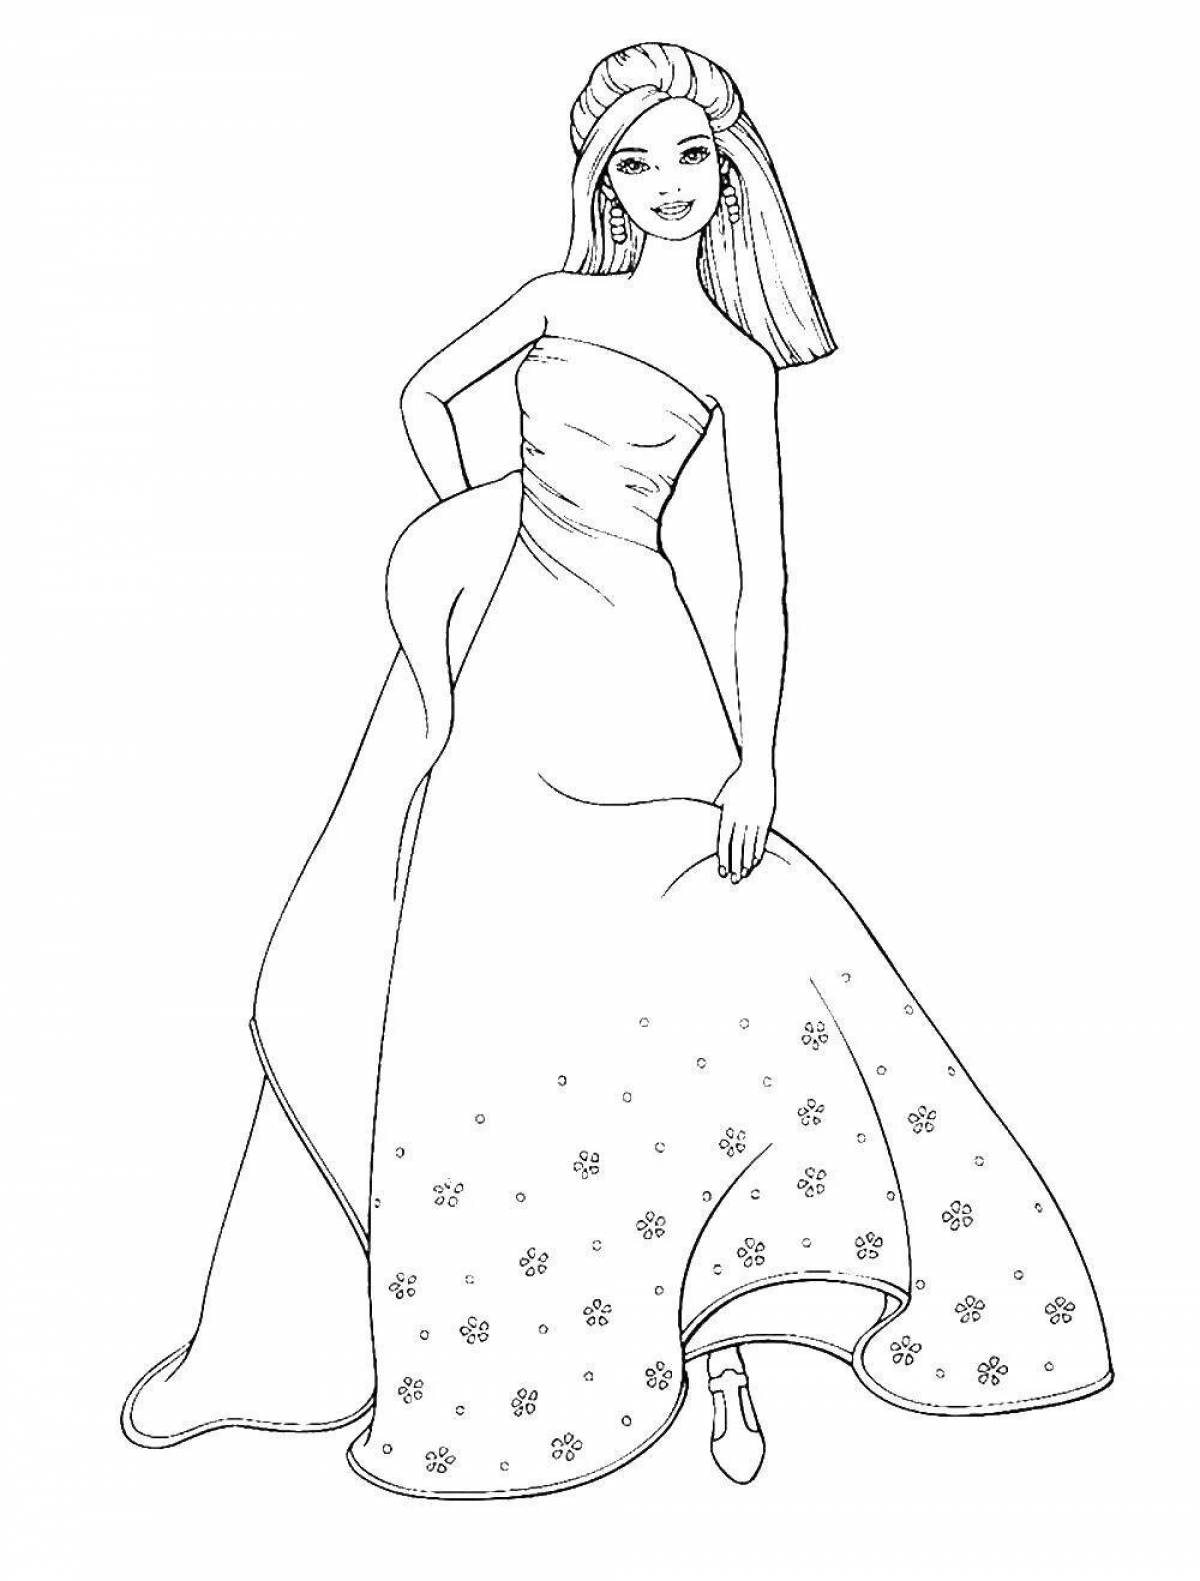 Finished coloring barbie in a dress